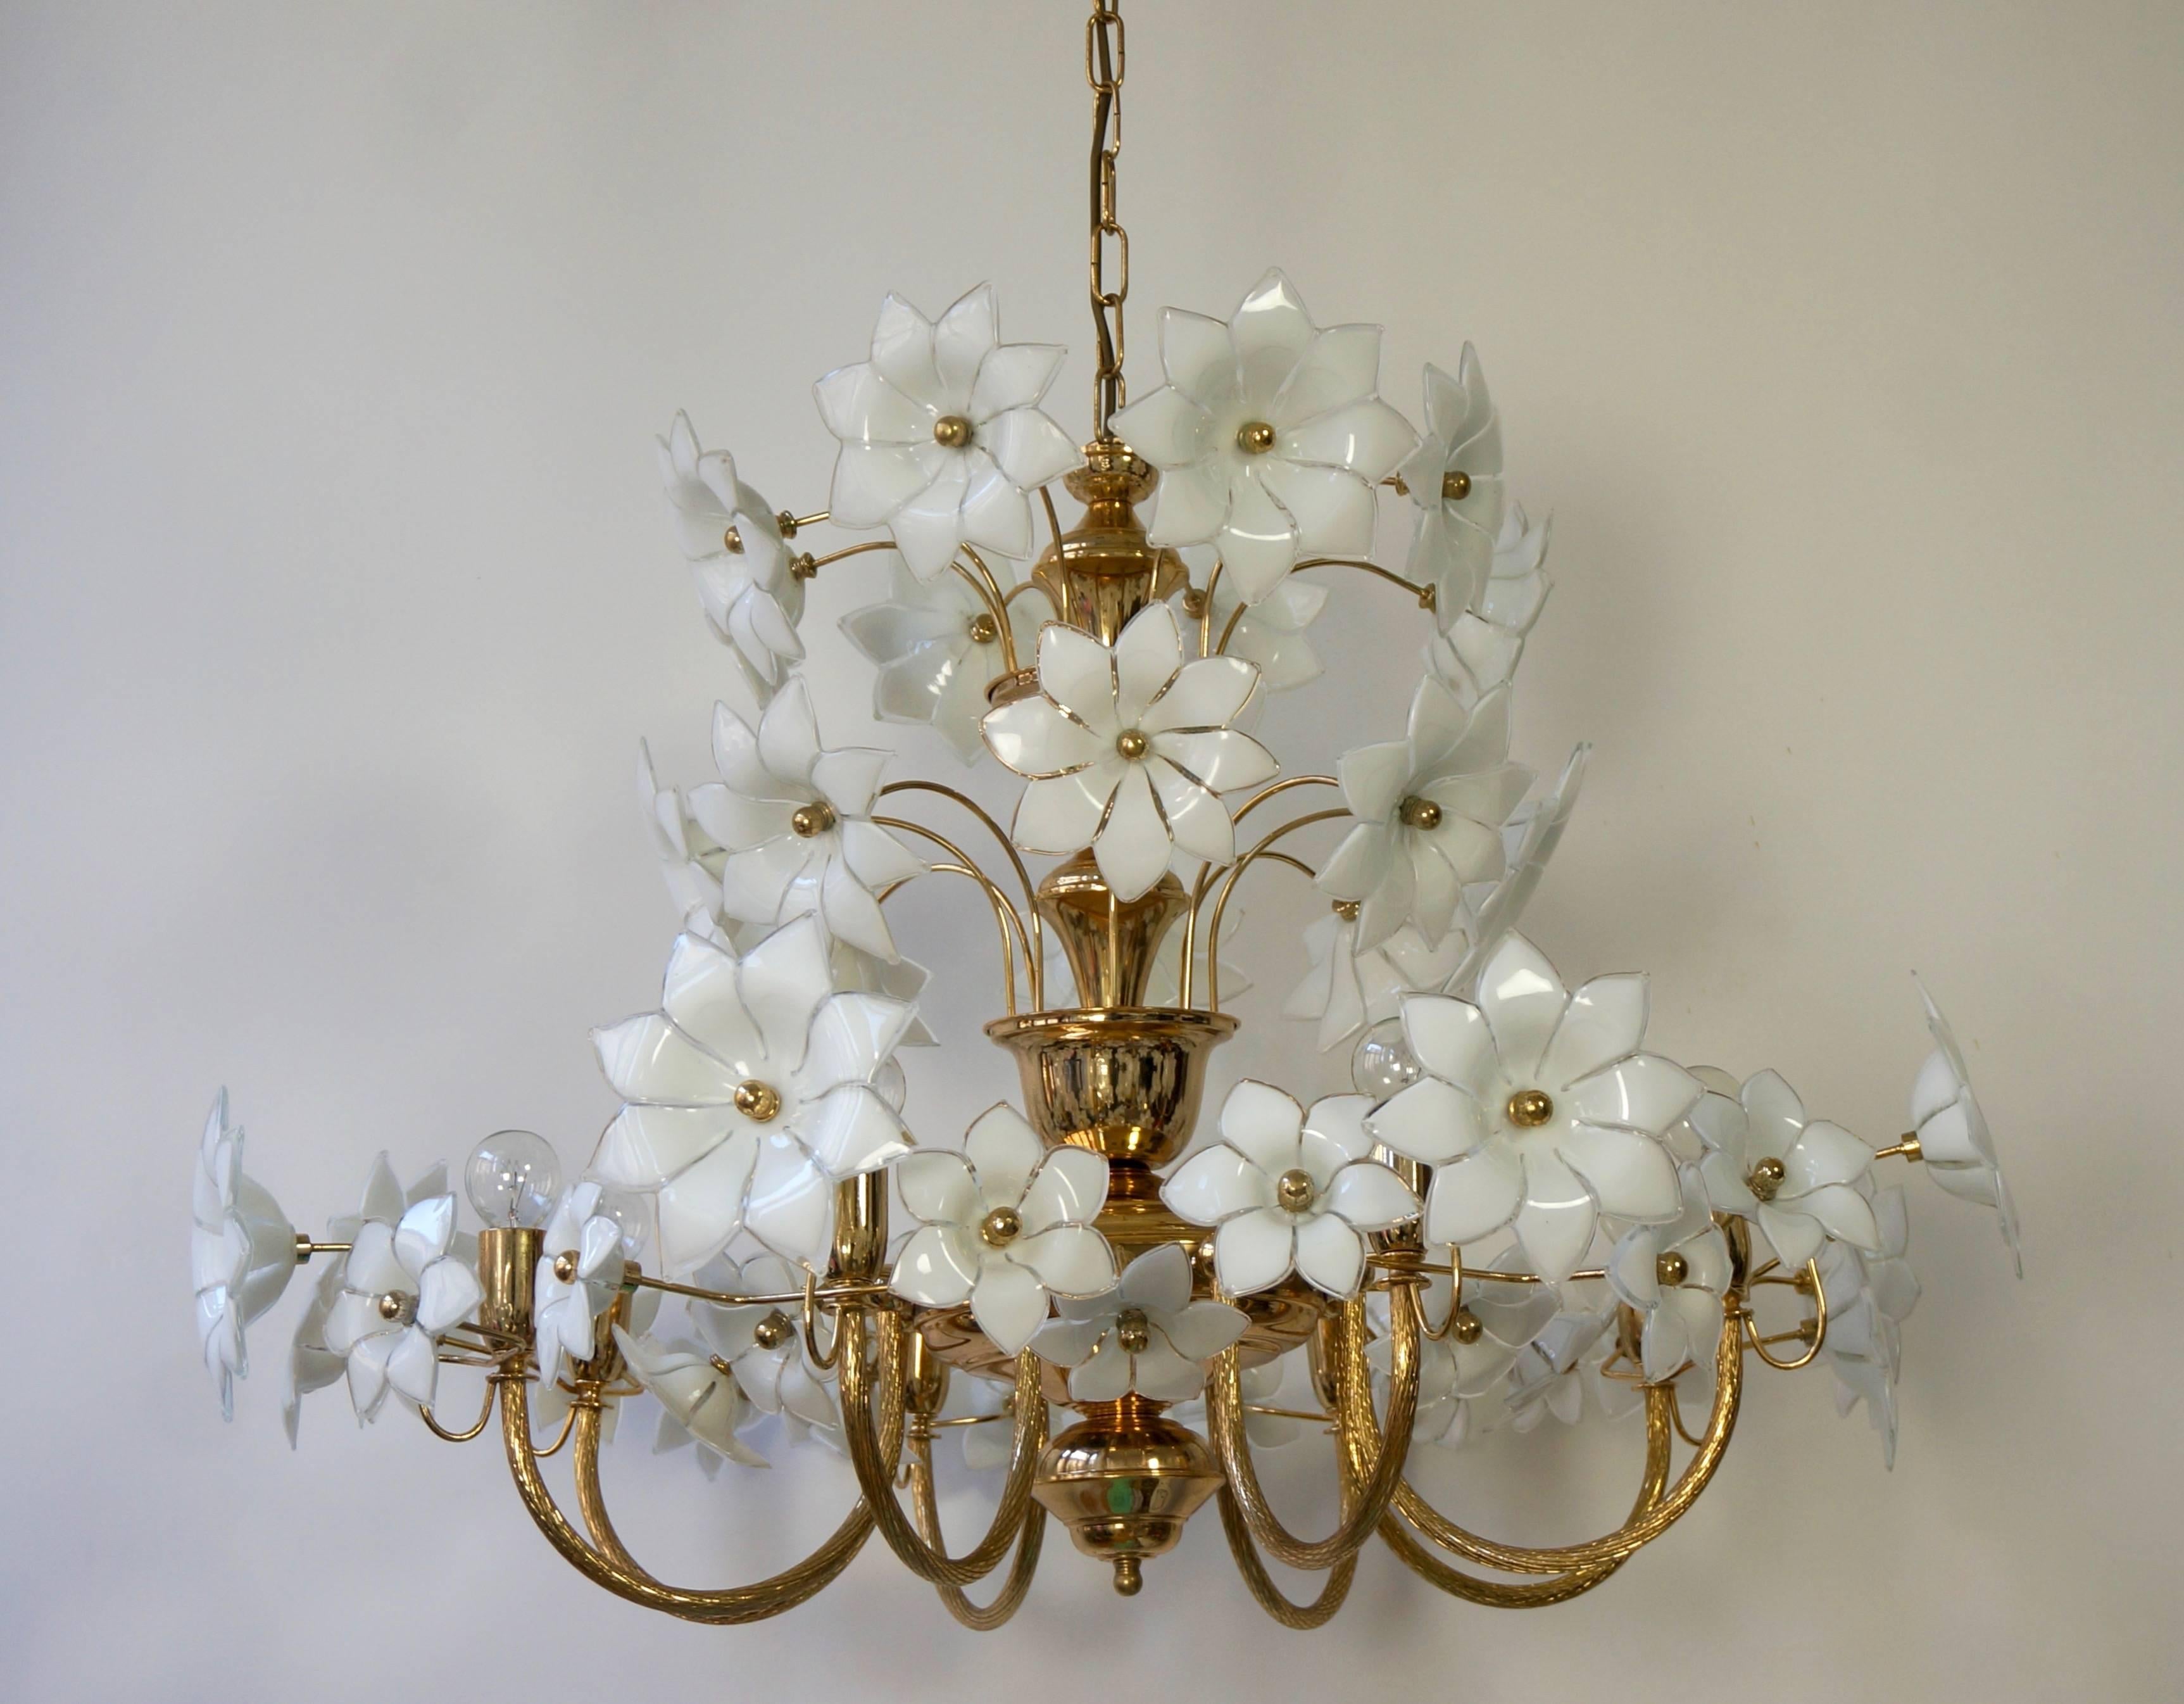 Very glamorous and large flower chandelier with 48 large flowers in two different sizes. Gold plated brass stunning chandelier with eight bulbs illuminating the wonderful gold and glass flowers. Total height with the chain is 110 cm. Diameter is 90